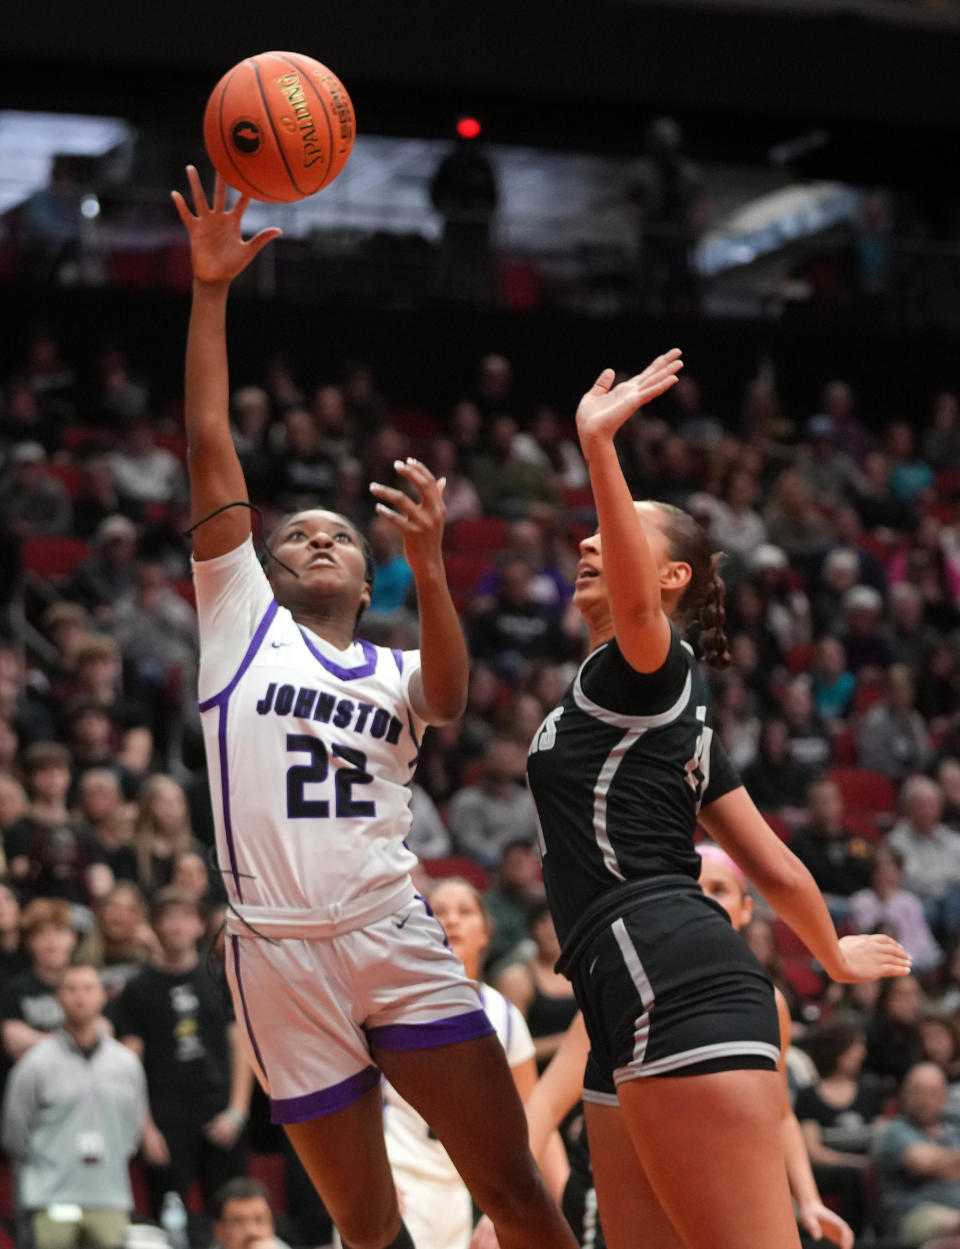 Johnston's Aaliyah Riley (22) drives to the basket during their 5A semifinal matchup against Ankeny Centennial.